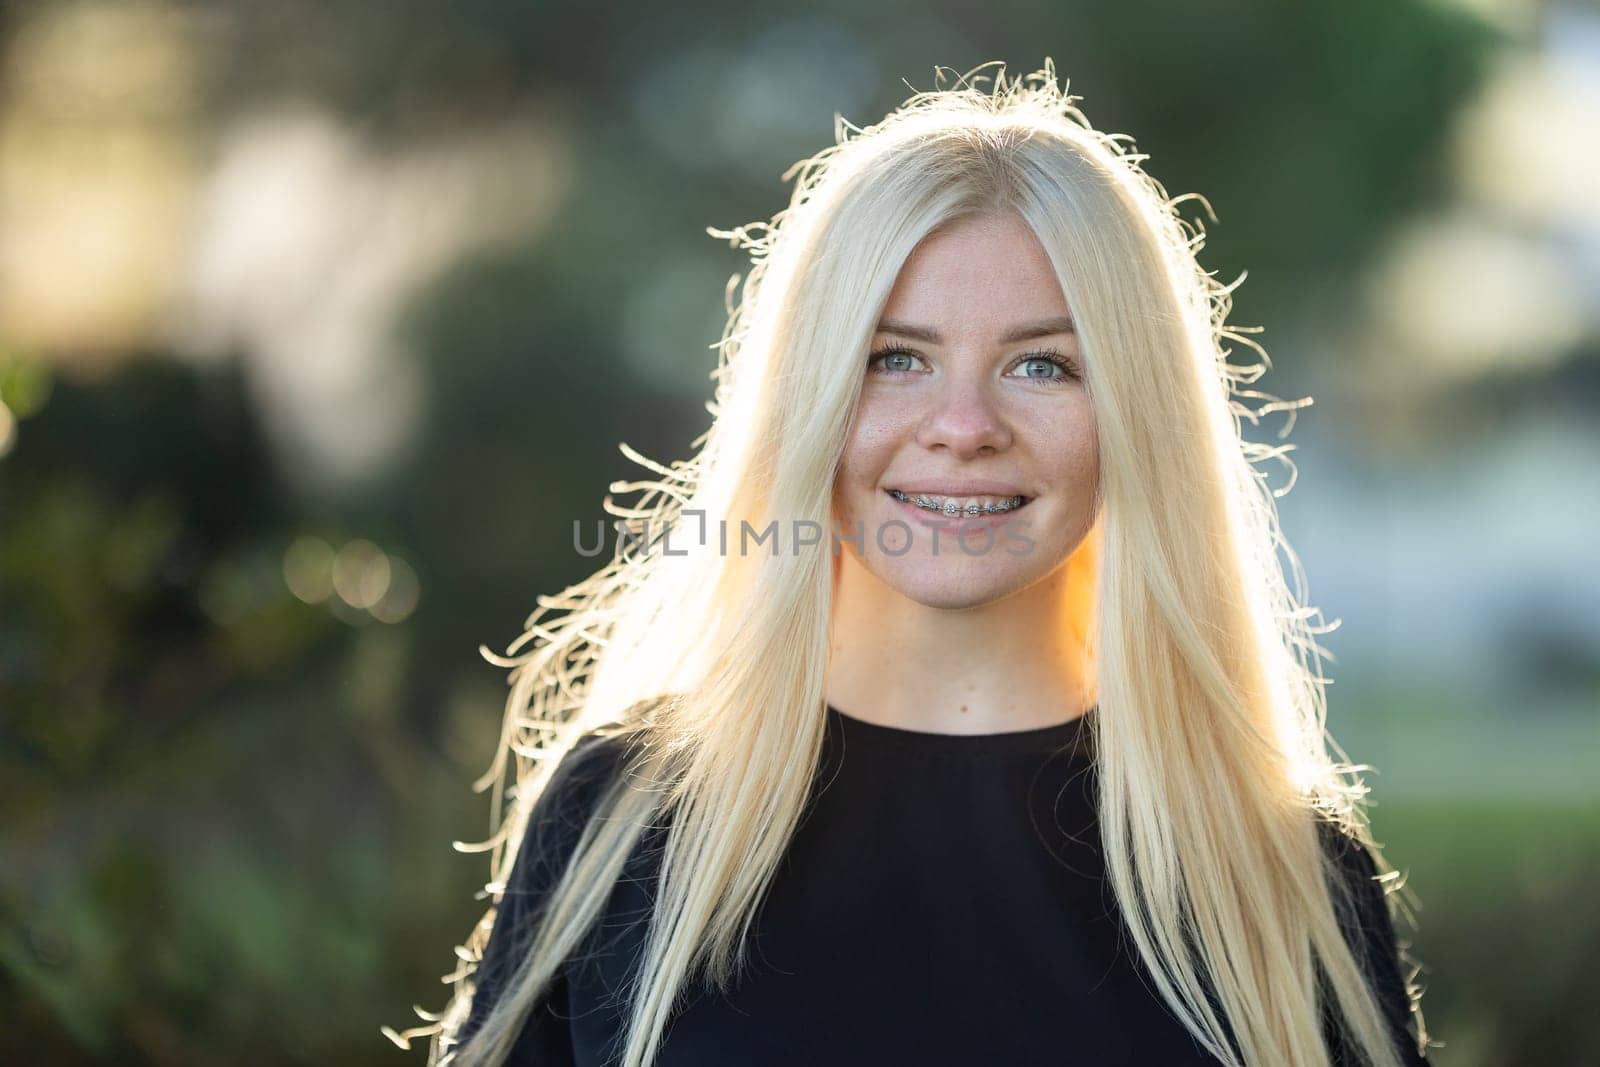 Smiling Woman with braces With Long Blonde Hair posing in the park by Studia72